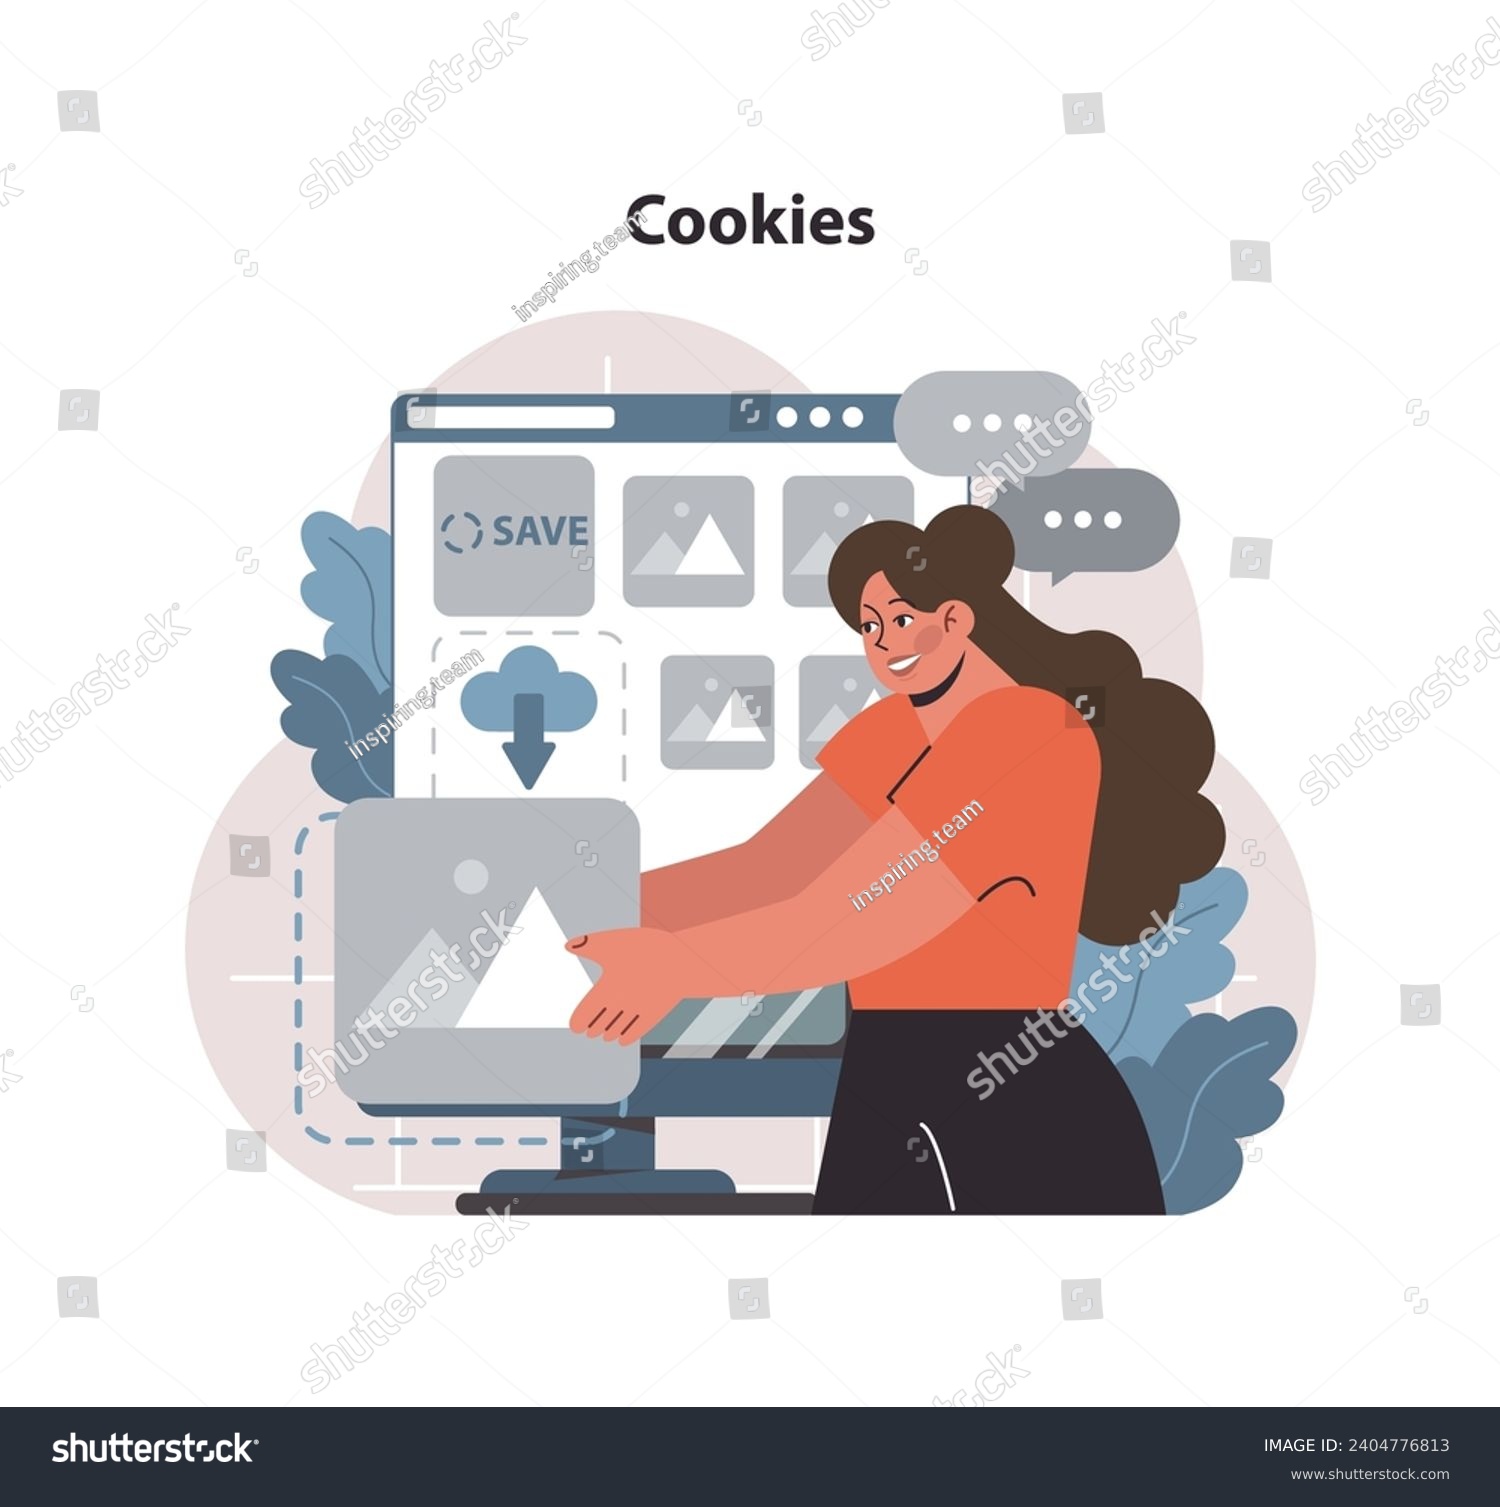 SVG of Cookies concept. Smiling woman interacts with a webpage displaying Save and cloud icons, indicating data storage preferences. Digital privacy and user experience. Flat vector illustration svg